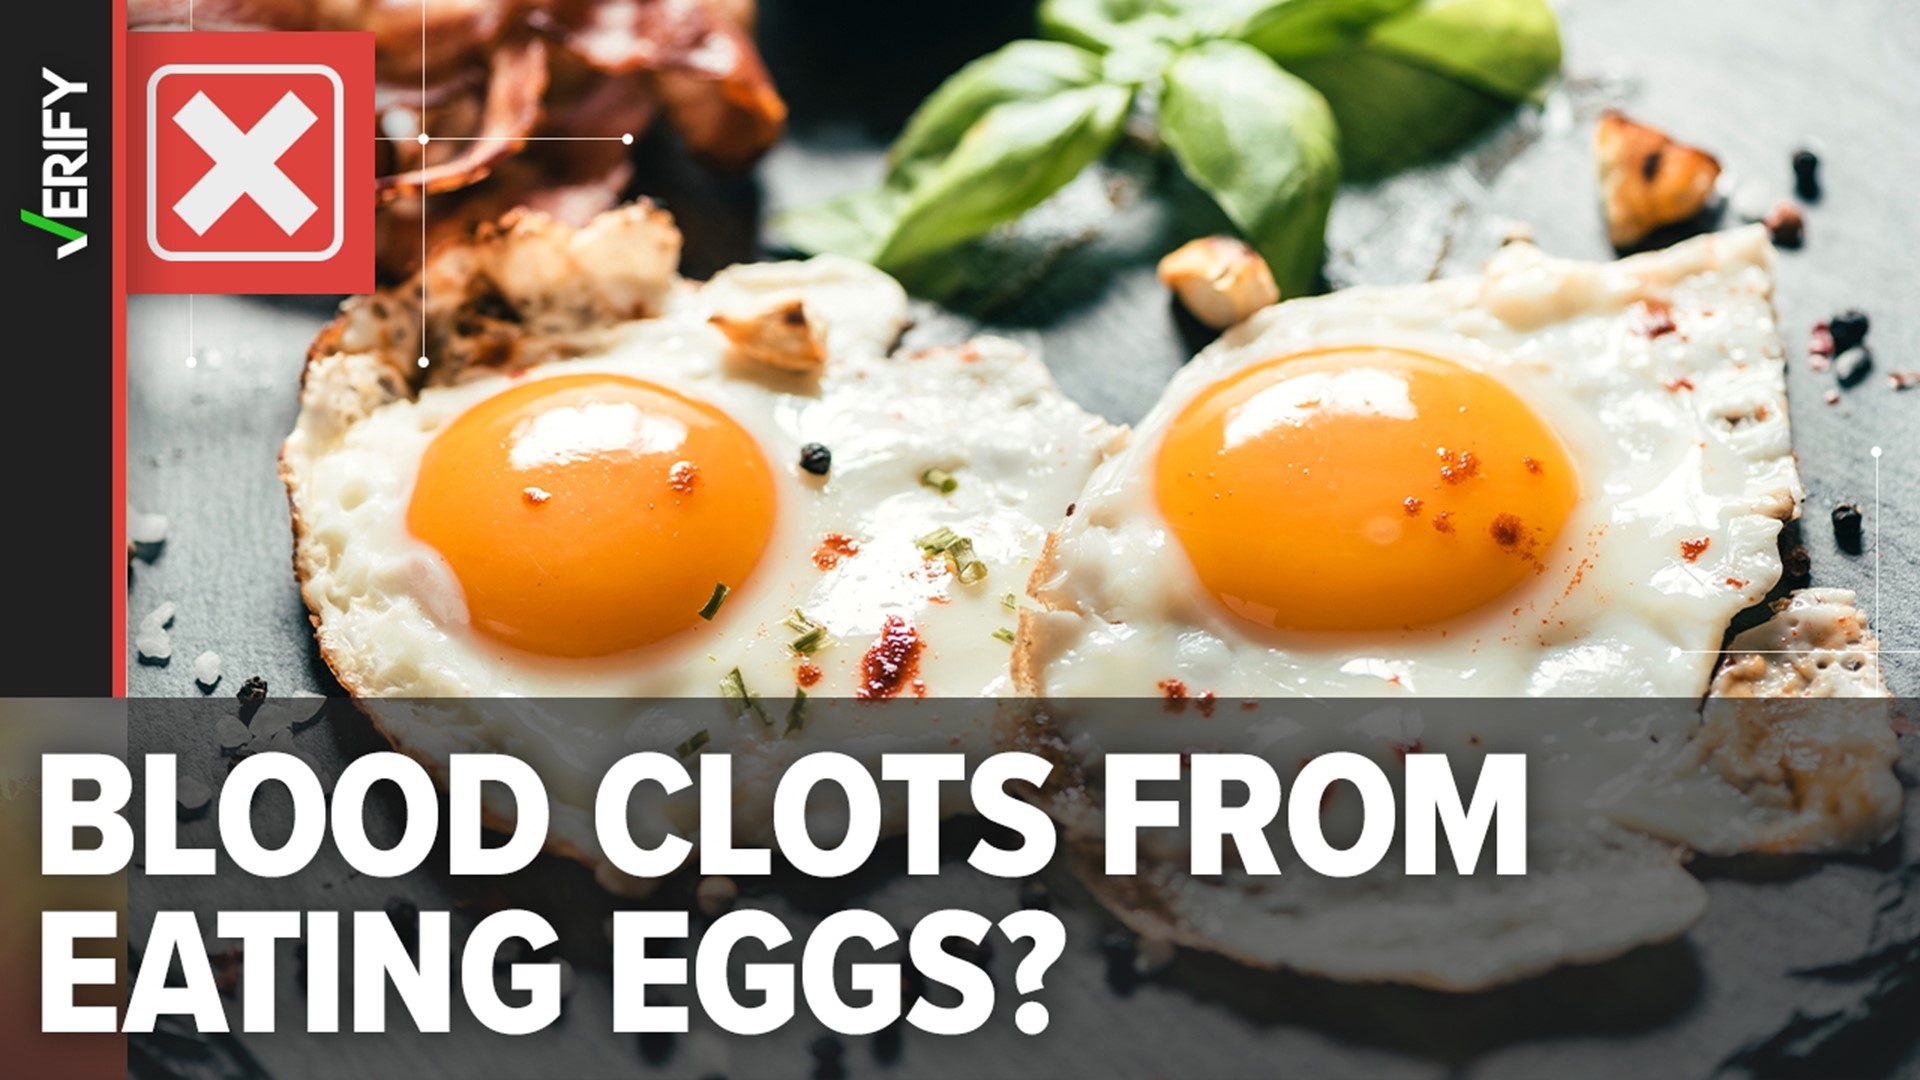 Scientists didn't warn that eating eggs causes blood clots